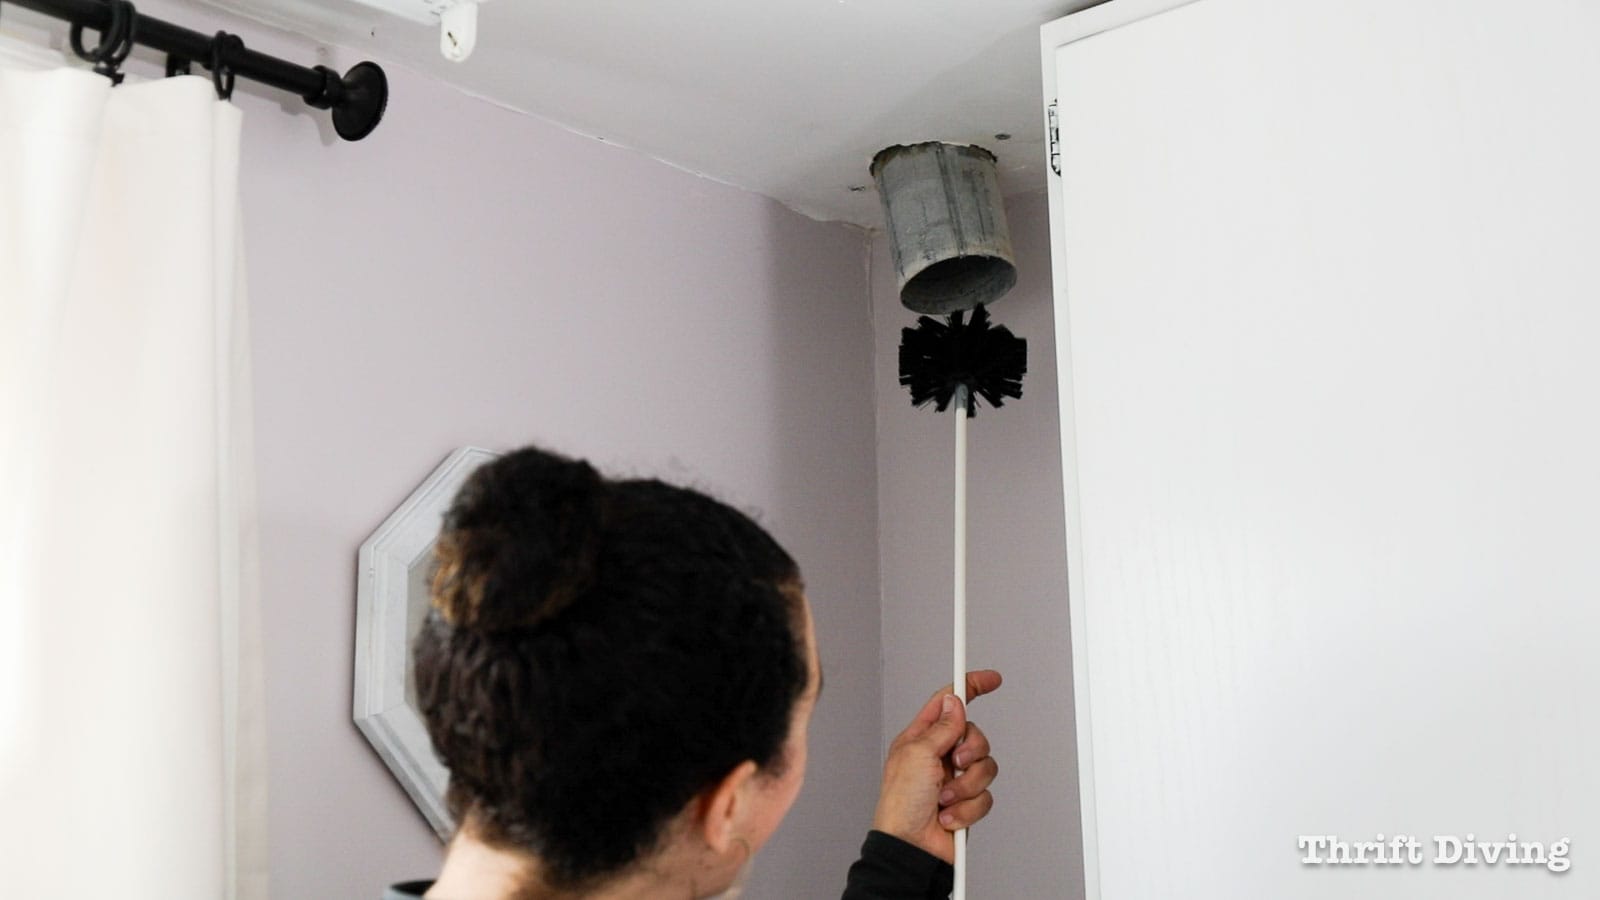 Using a dryer vent kit to clean the dryer vent. - 7 Home Maintenance Tasks - Thrift Diving